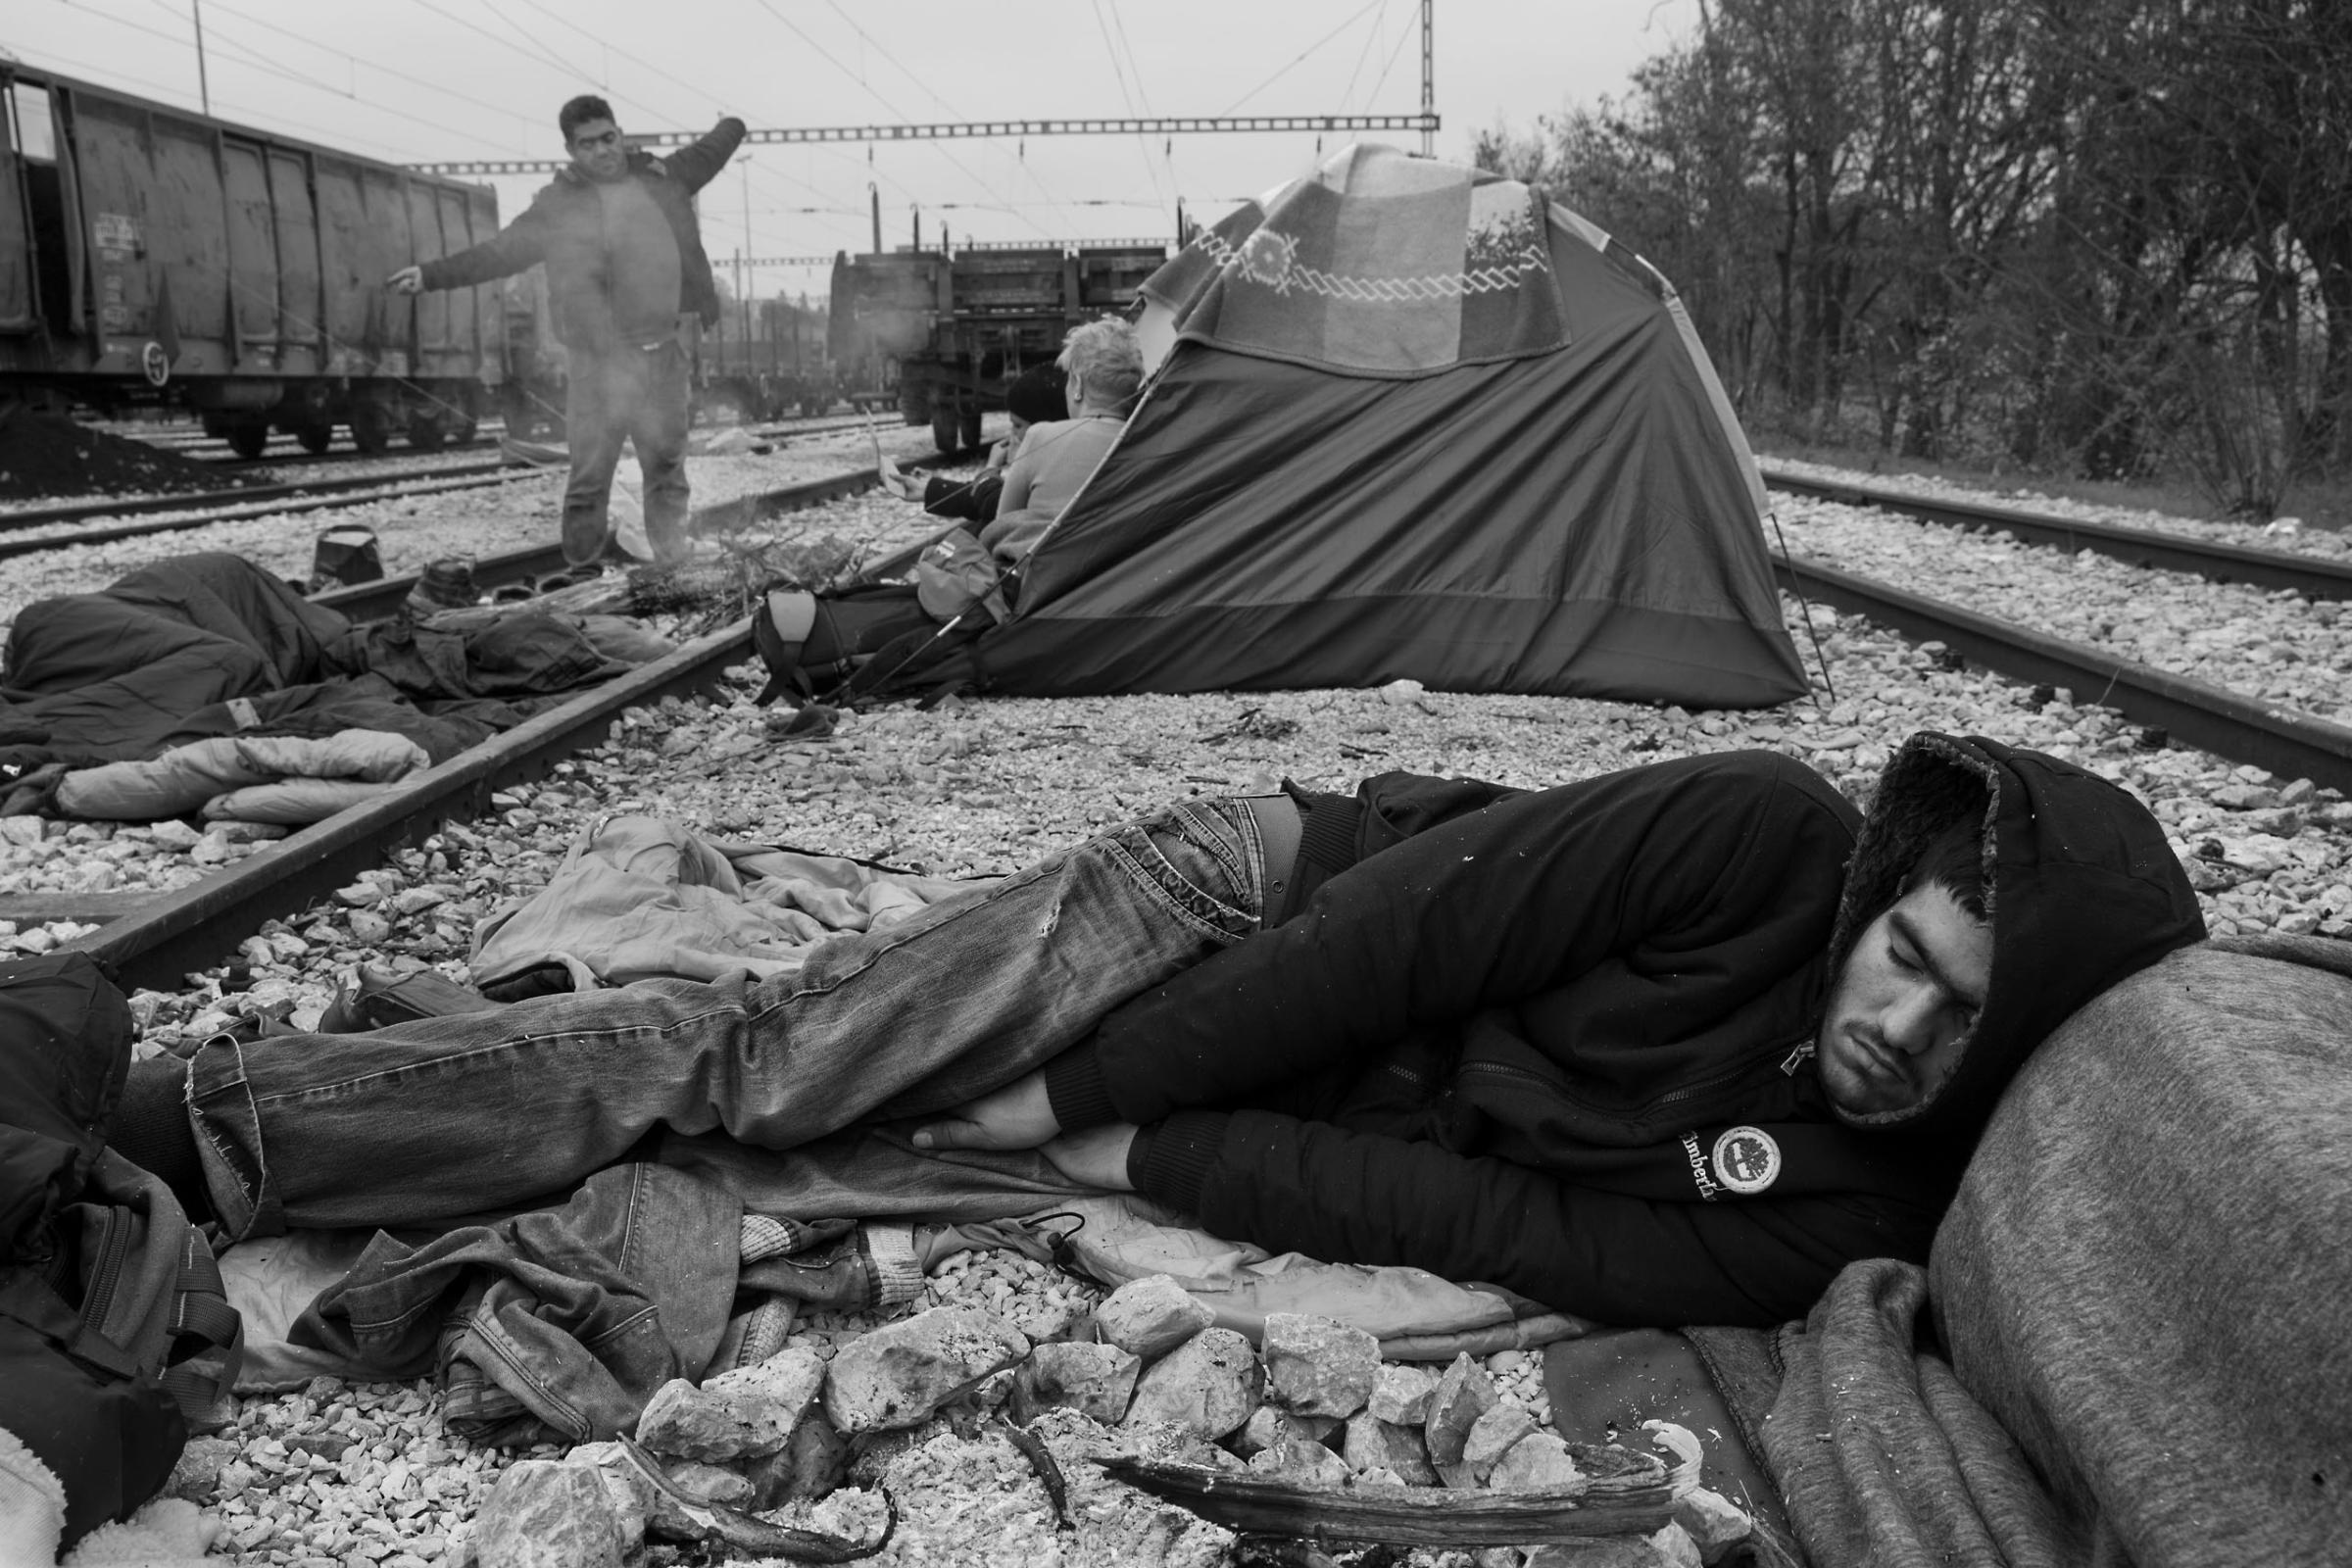 A man sleeps at a camp for refugees near the border town of Idomeni in Greece. Thousands are stranded in Greece because of border closures in the Balkans, March 17, 2016.